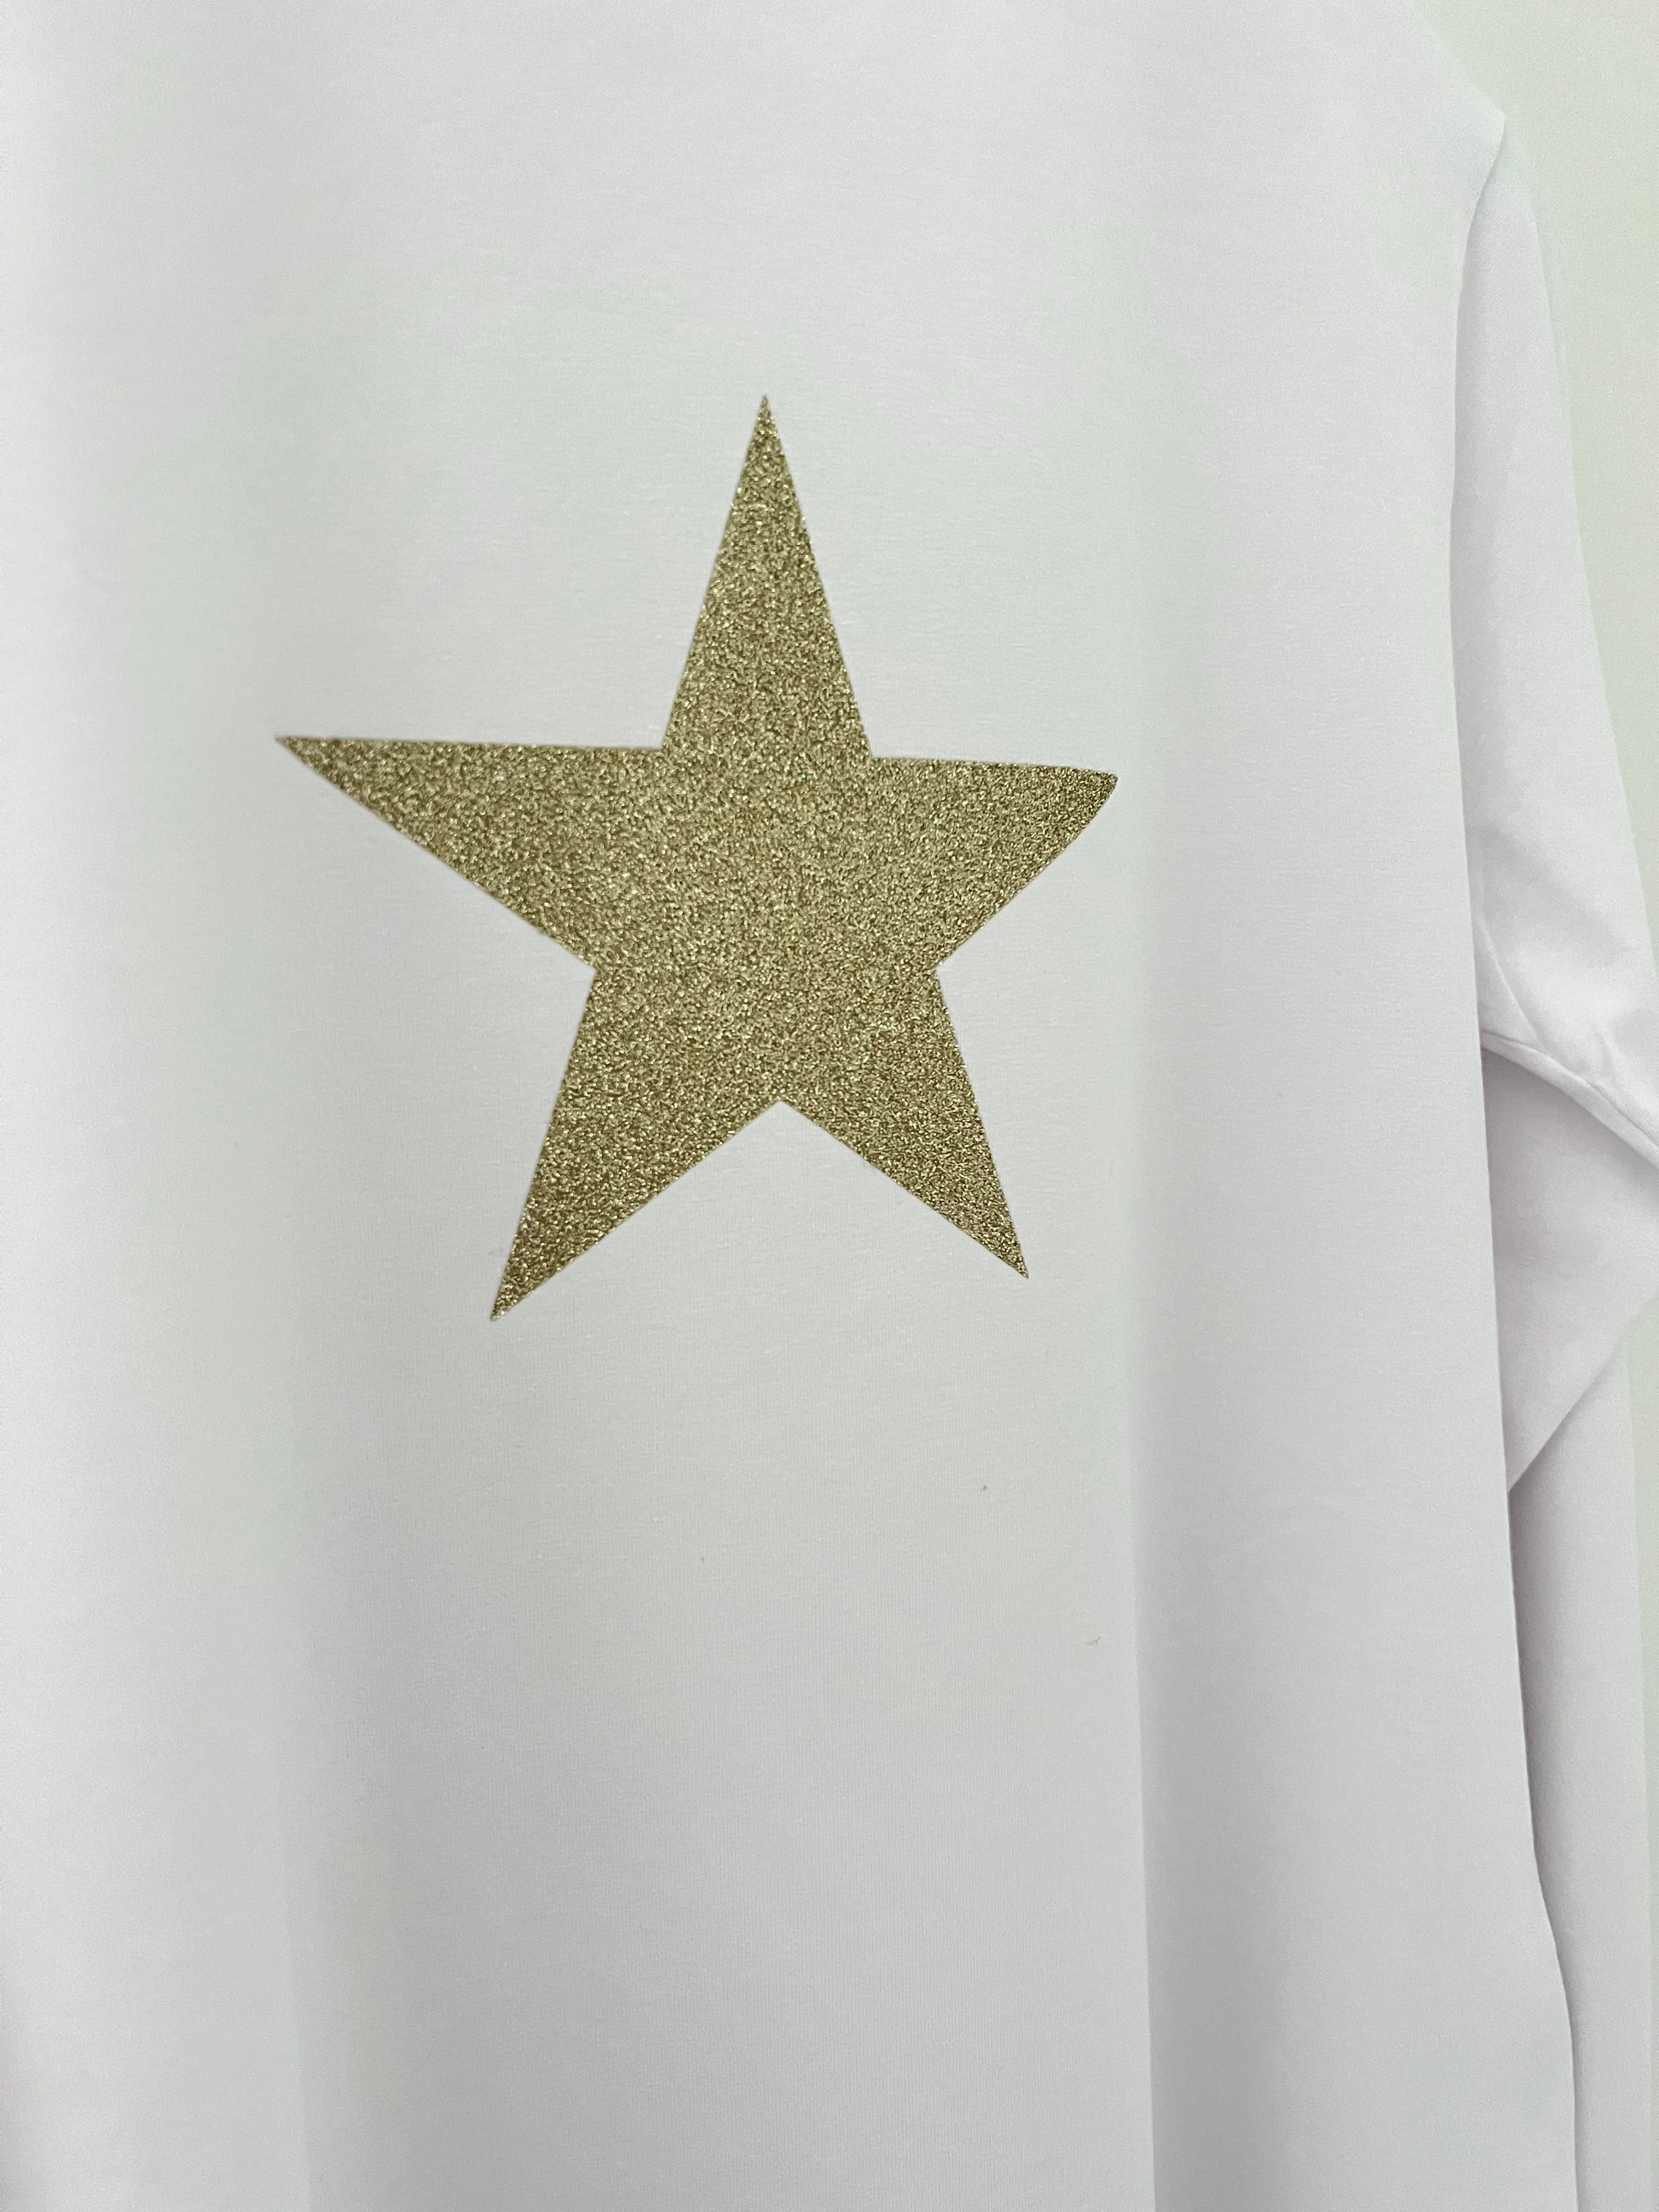 White Long Sleeve Top with Champagne Glitter Star